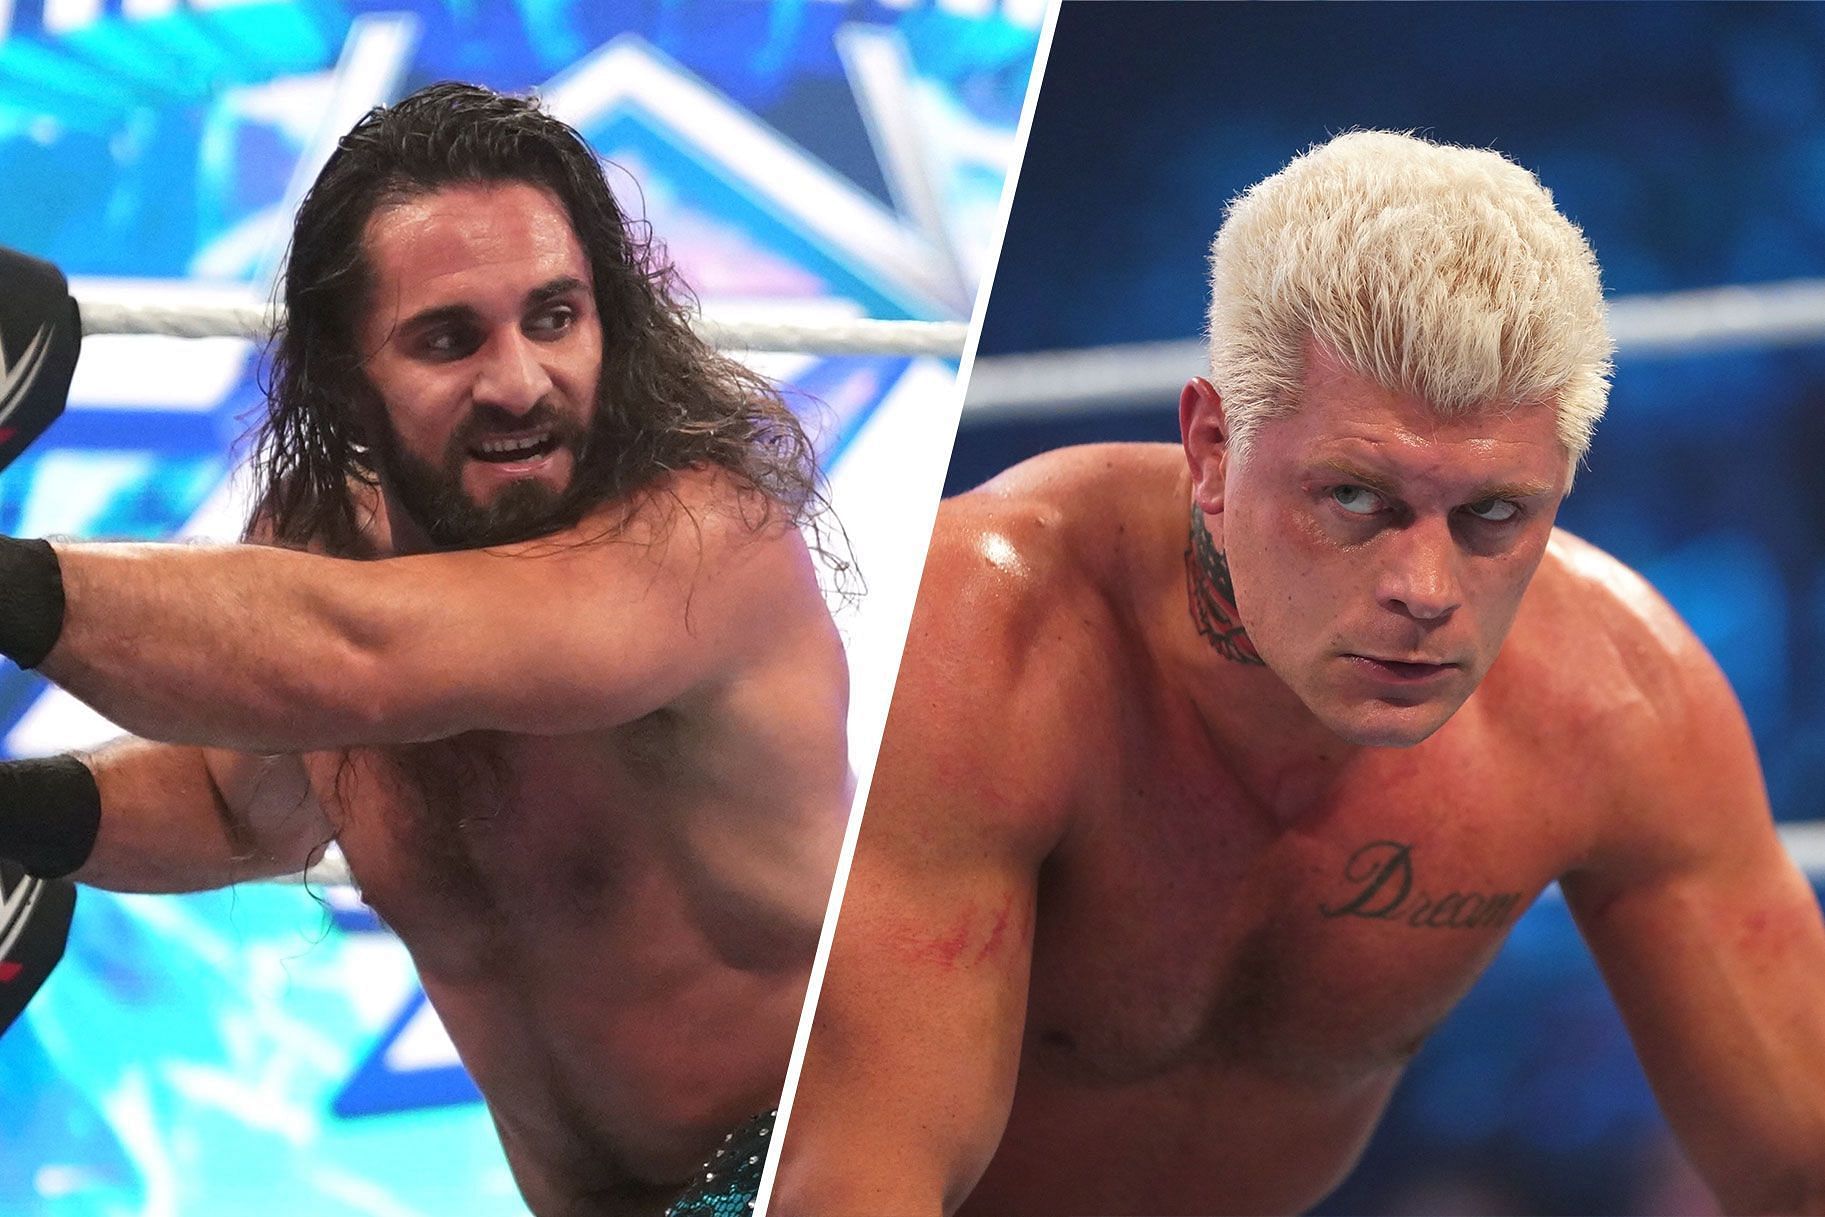 Rollins and Rhodes could both represent either brand as Champion.